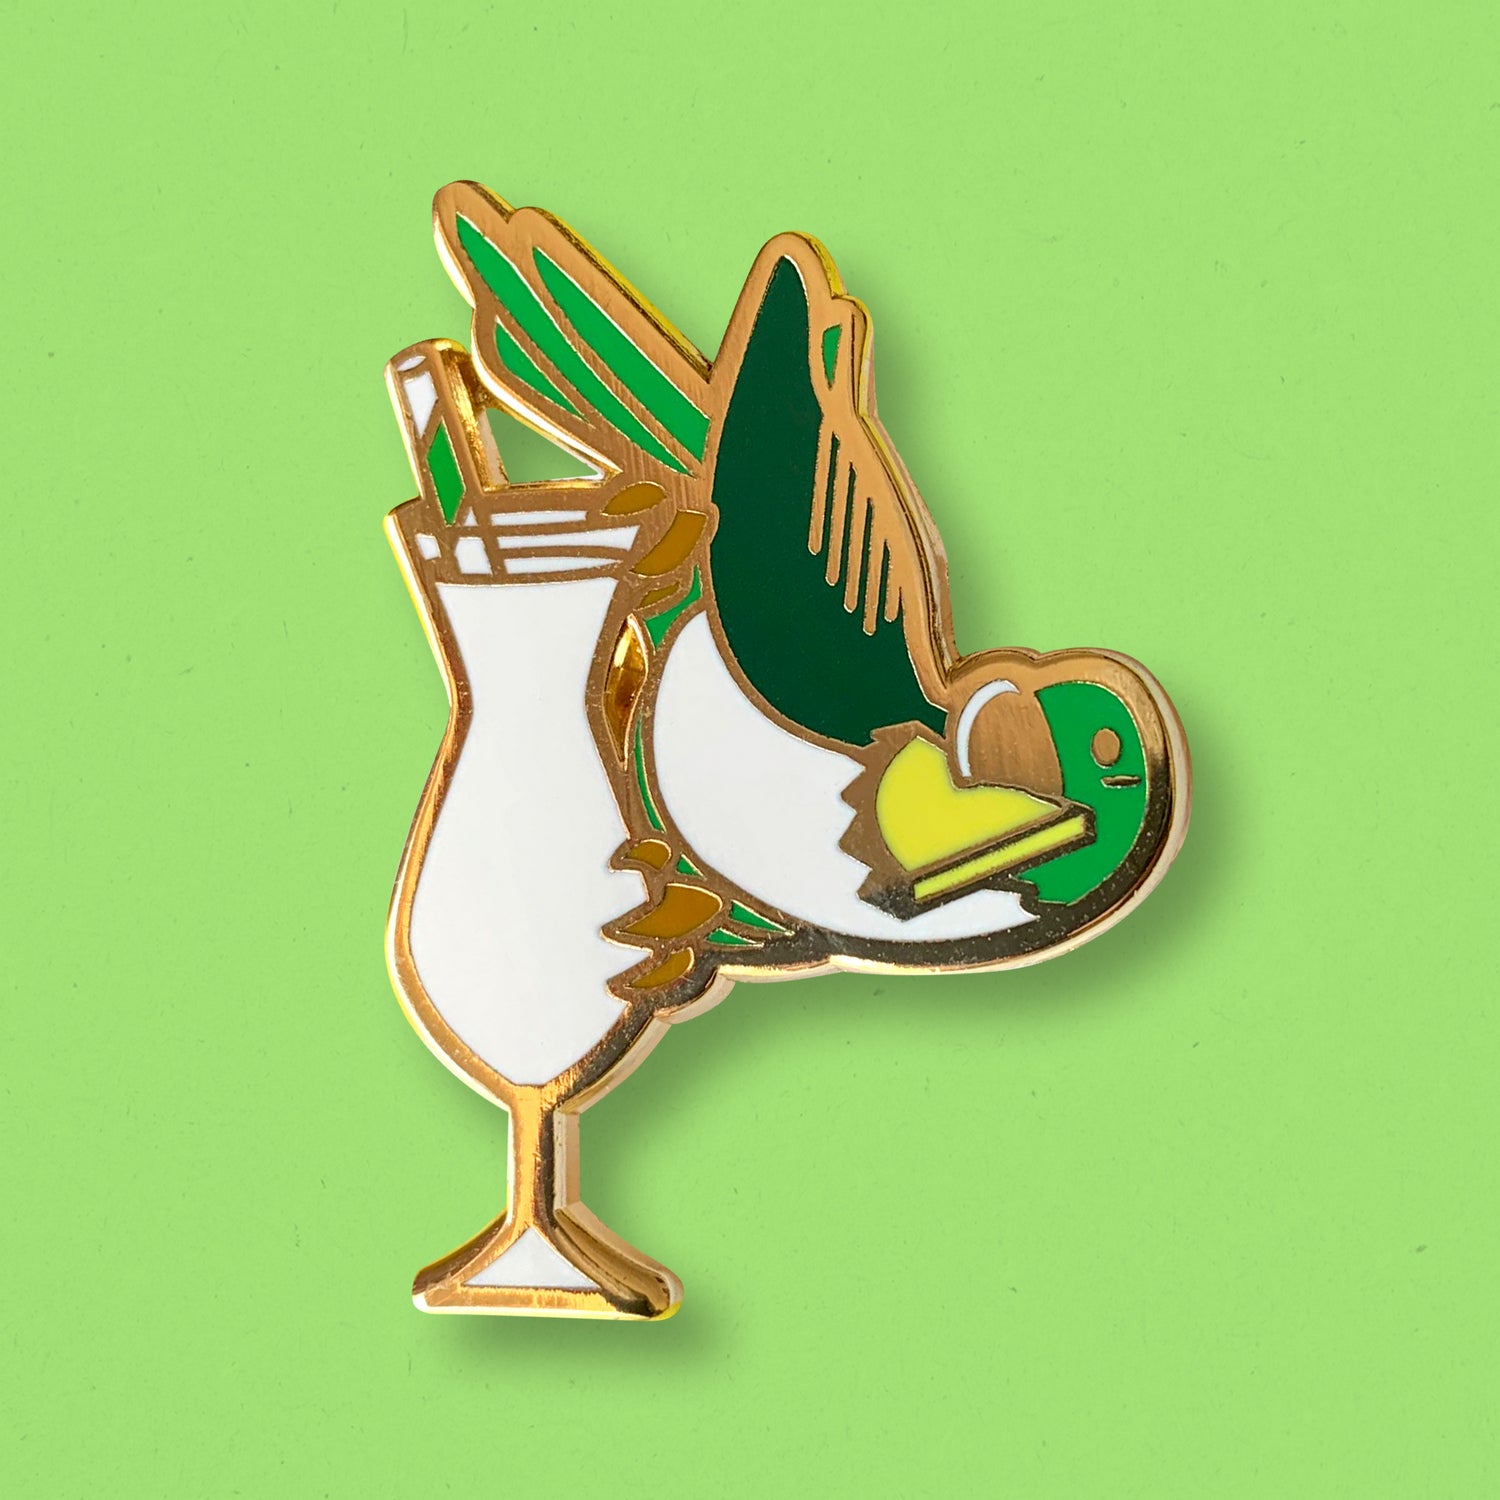 Parakeet and Pina Colada Cocktail Hard Enamel Pin by Cocktail Critters